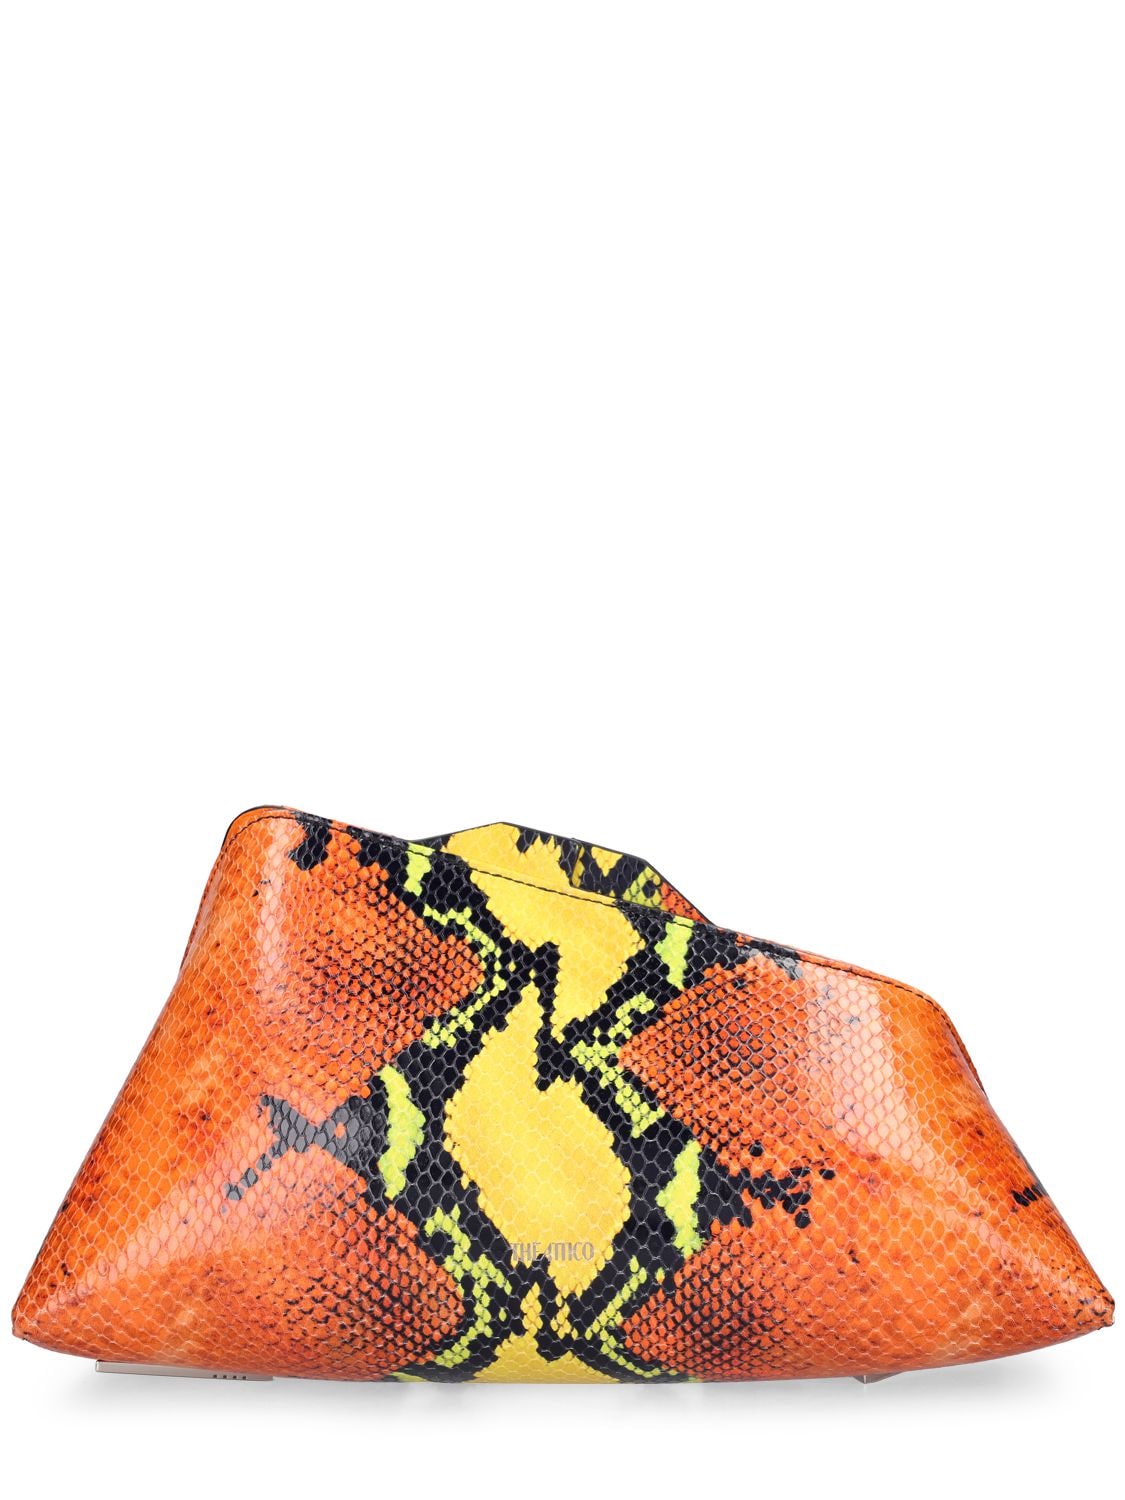 Attico 8:30 Pm Snake Printed Leather Clutch In Orange,yellow